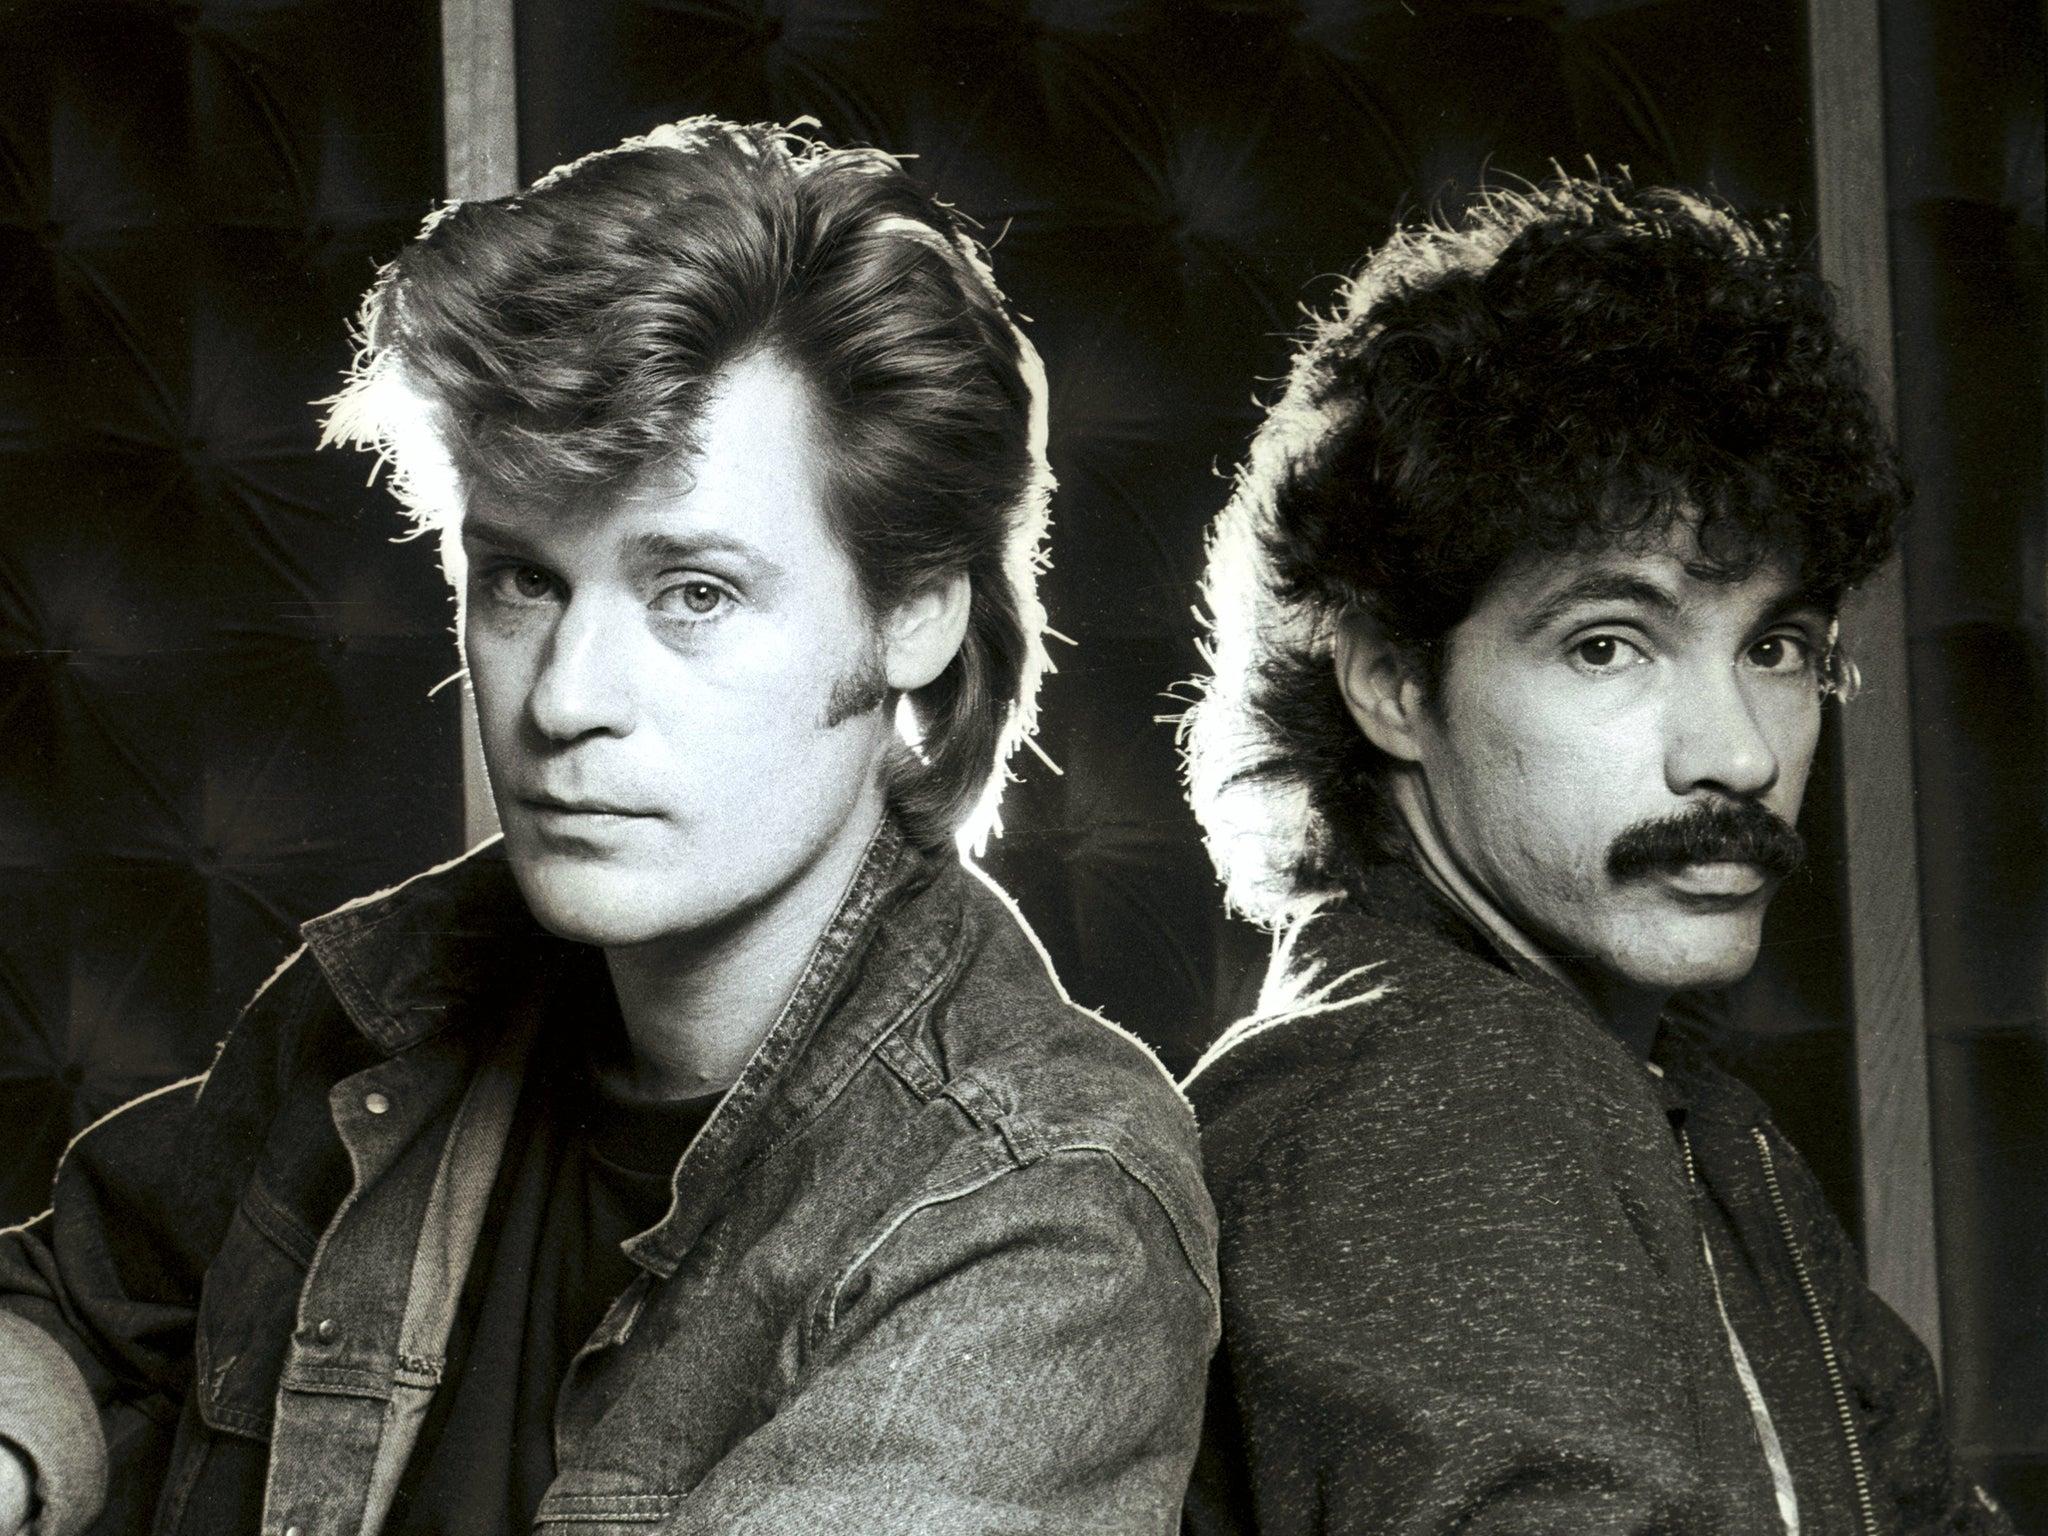 Hall oates out of touch. Оутс, Джон. Hall & oates. Группа Hall & oates. Daryl oates.